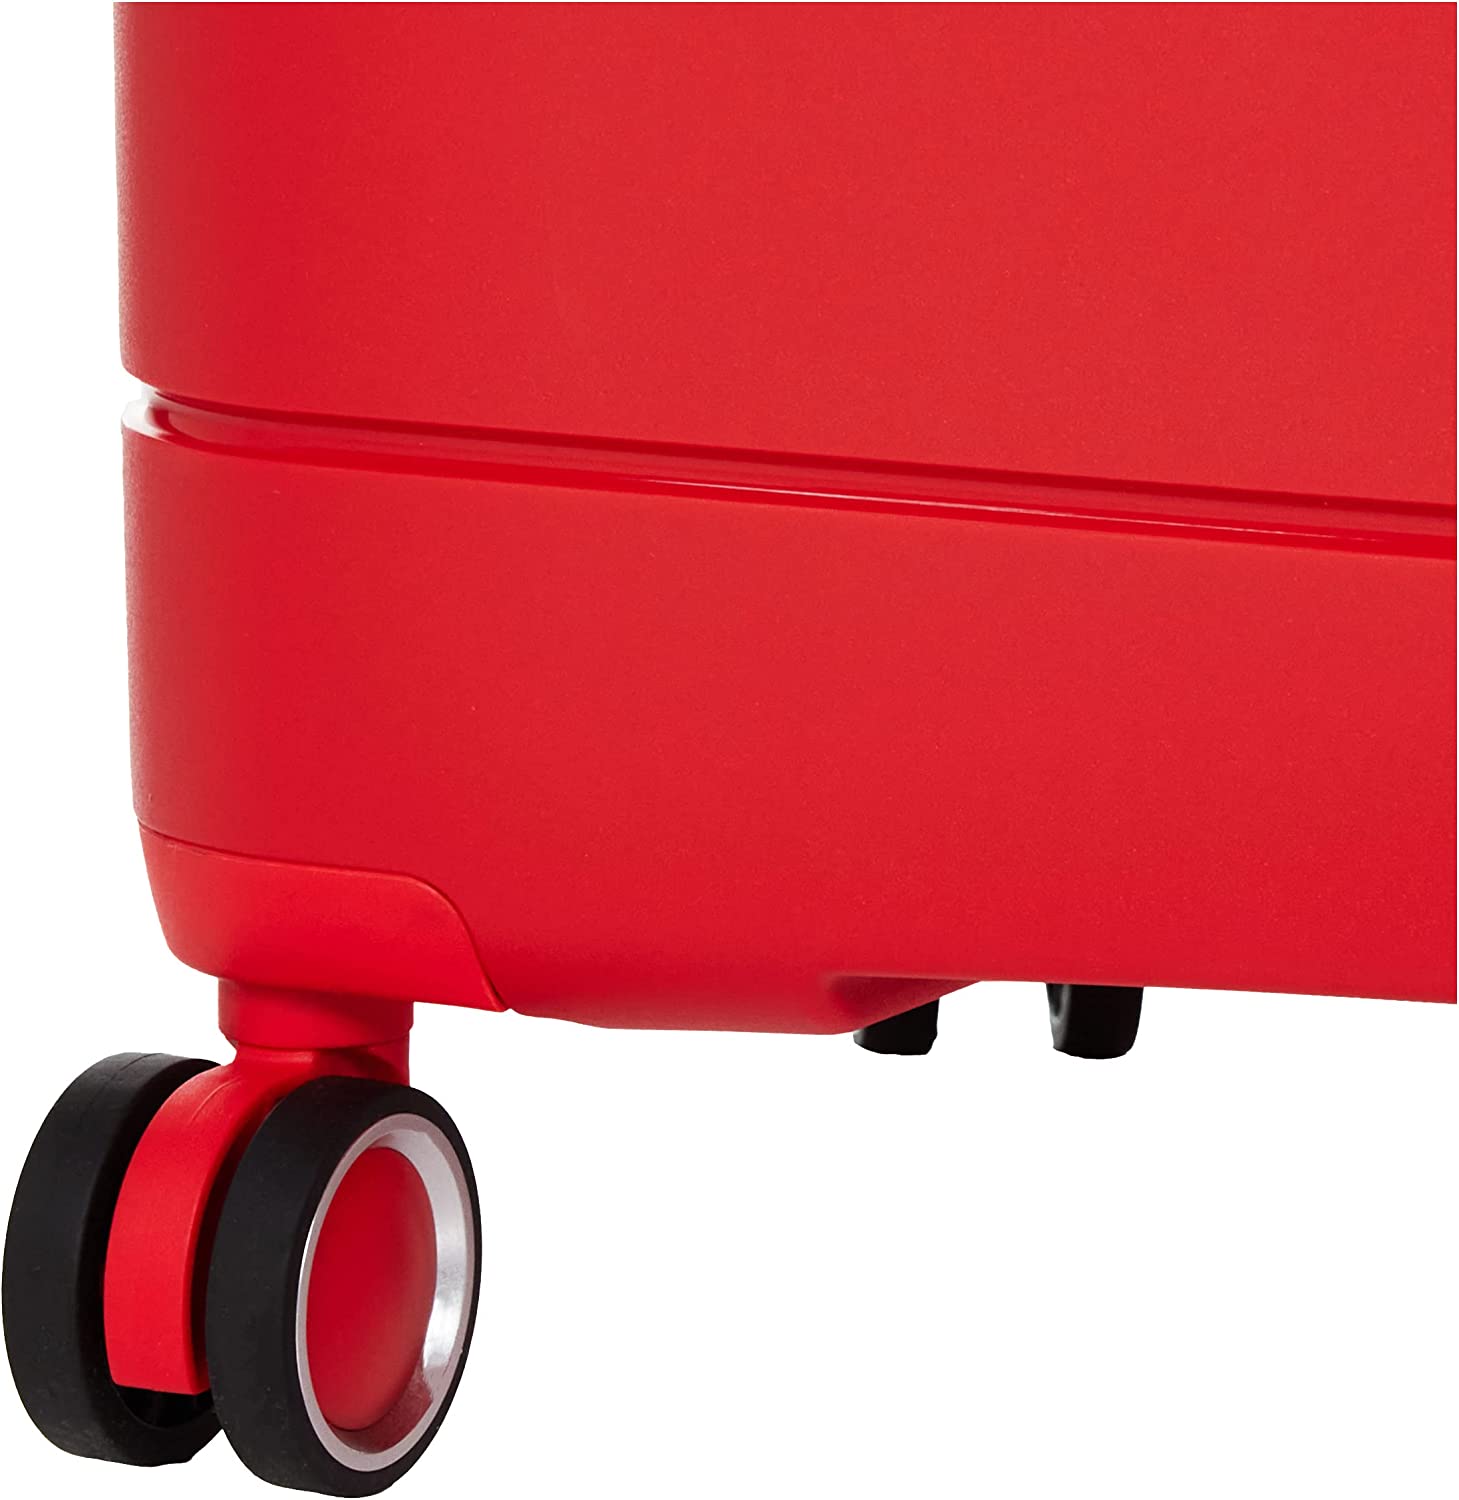 Pierre Cardin Zurich Collection Carry On - Red